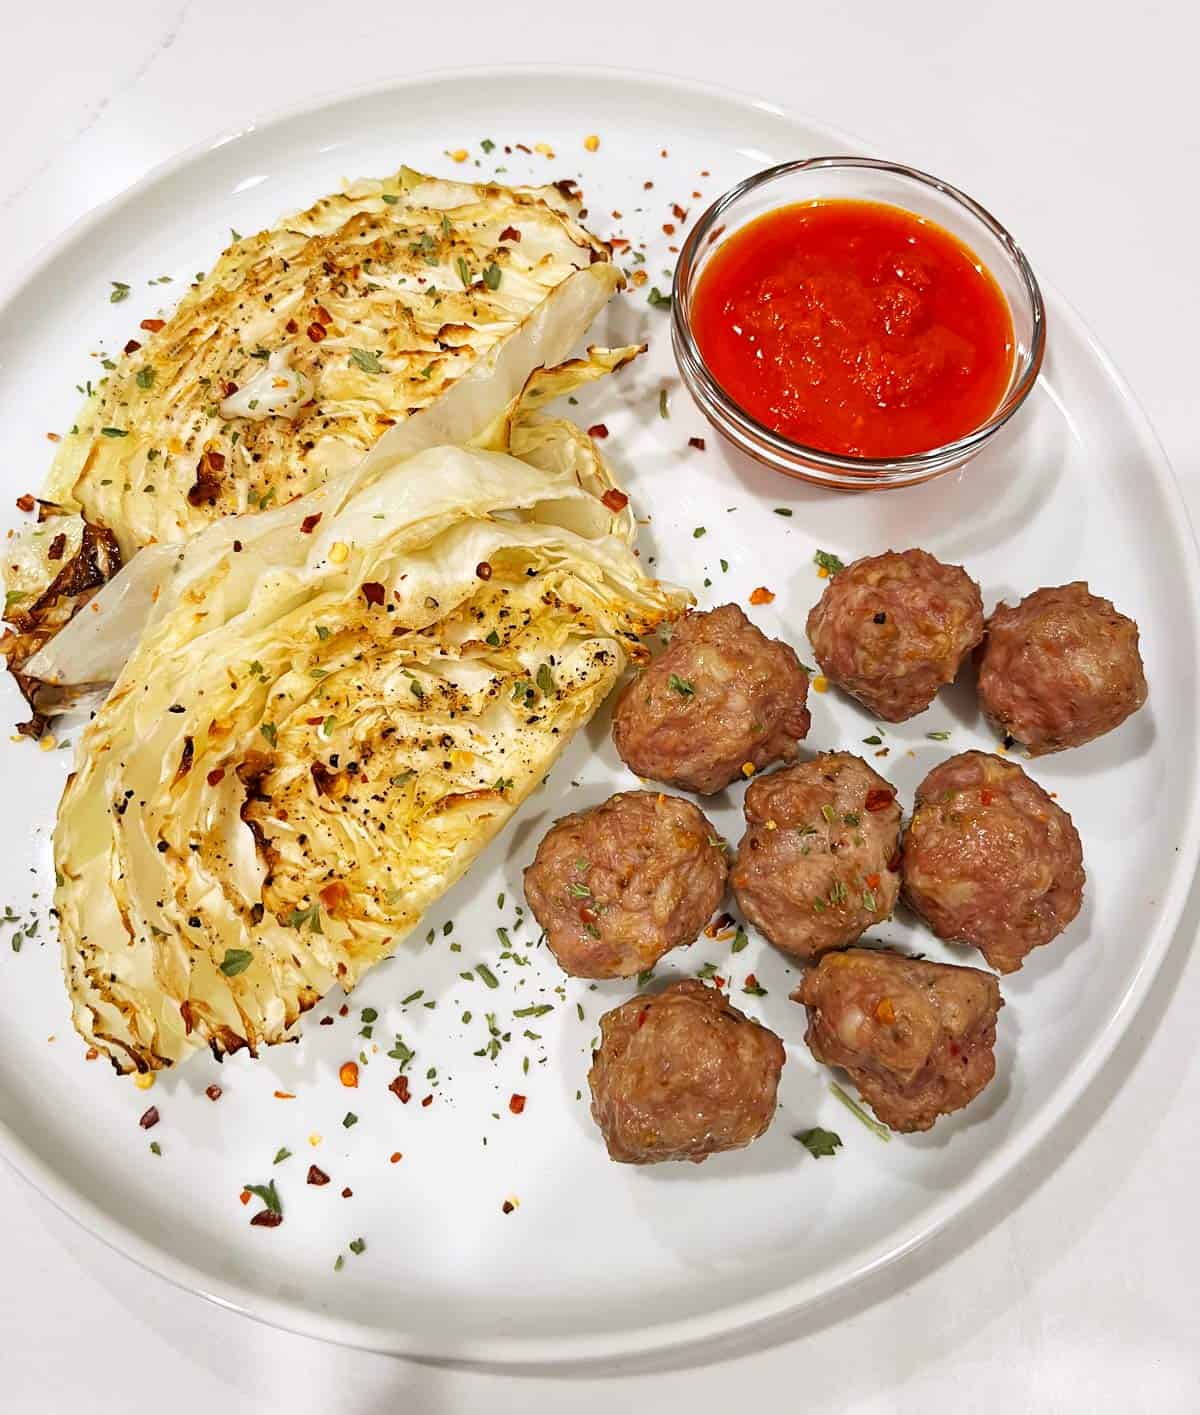 Pork meatballs are served with a side of roasted cabbage.